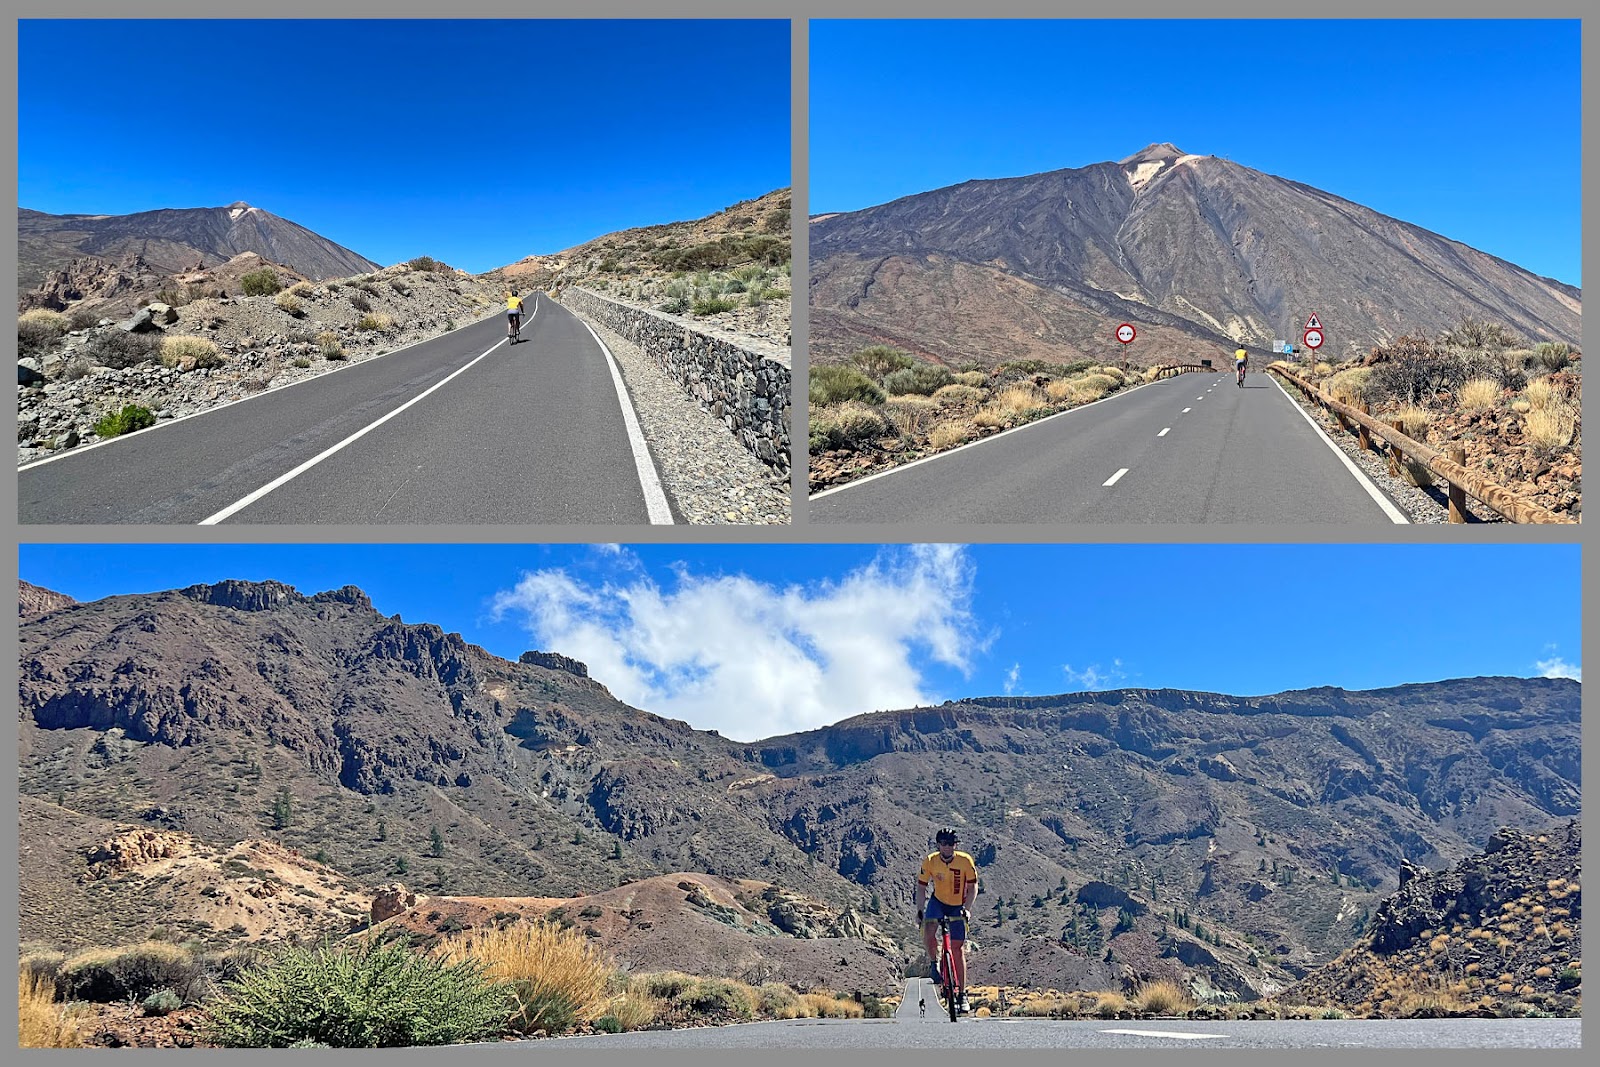 PJAMM Cyclist riding on two-lane highway roadway with Mt. Teide in background